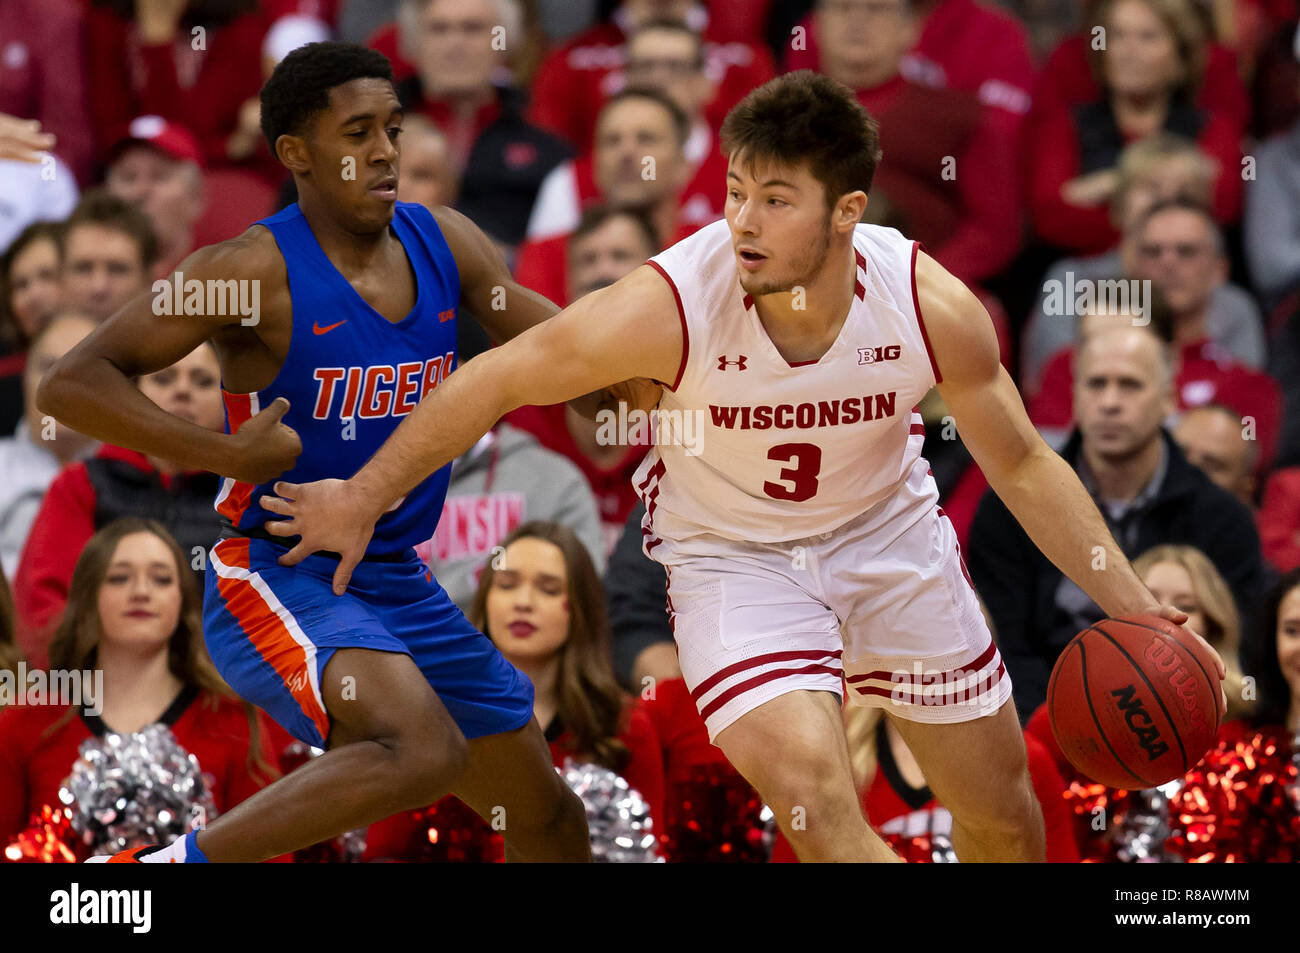 Madison, WI, USA. 13th Dec, 2018. Wisconsin Badgers guard Walt McGrory #3 in action during the NCAA Basketball game between the Savannah State Tigers and the Wisconsin Badgers at the Kohl Center in Madison, WI. Badgers defeated the Tigers 101- 60. John Fisher/CSM/Alamy Live News Stock Photo